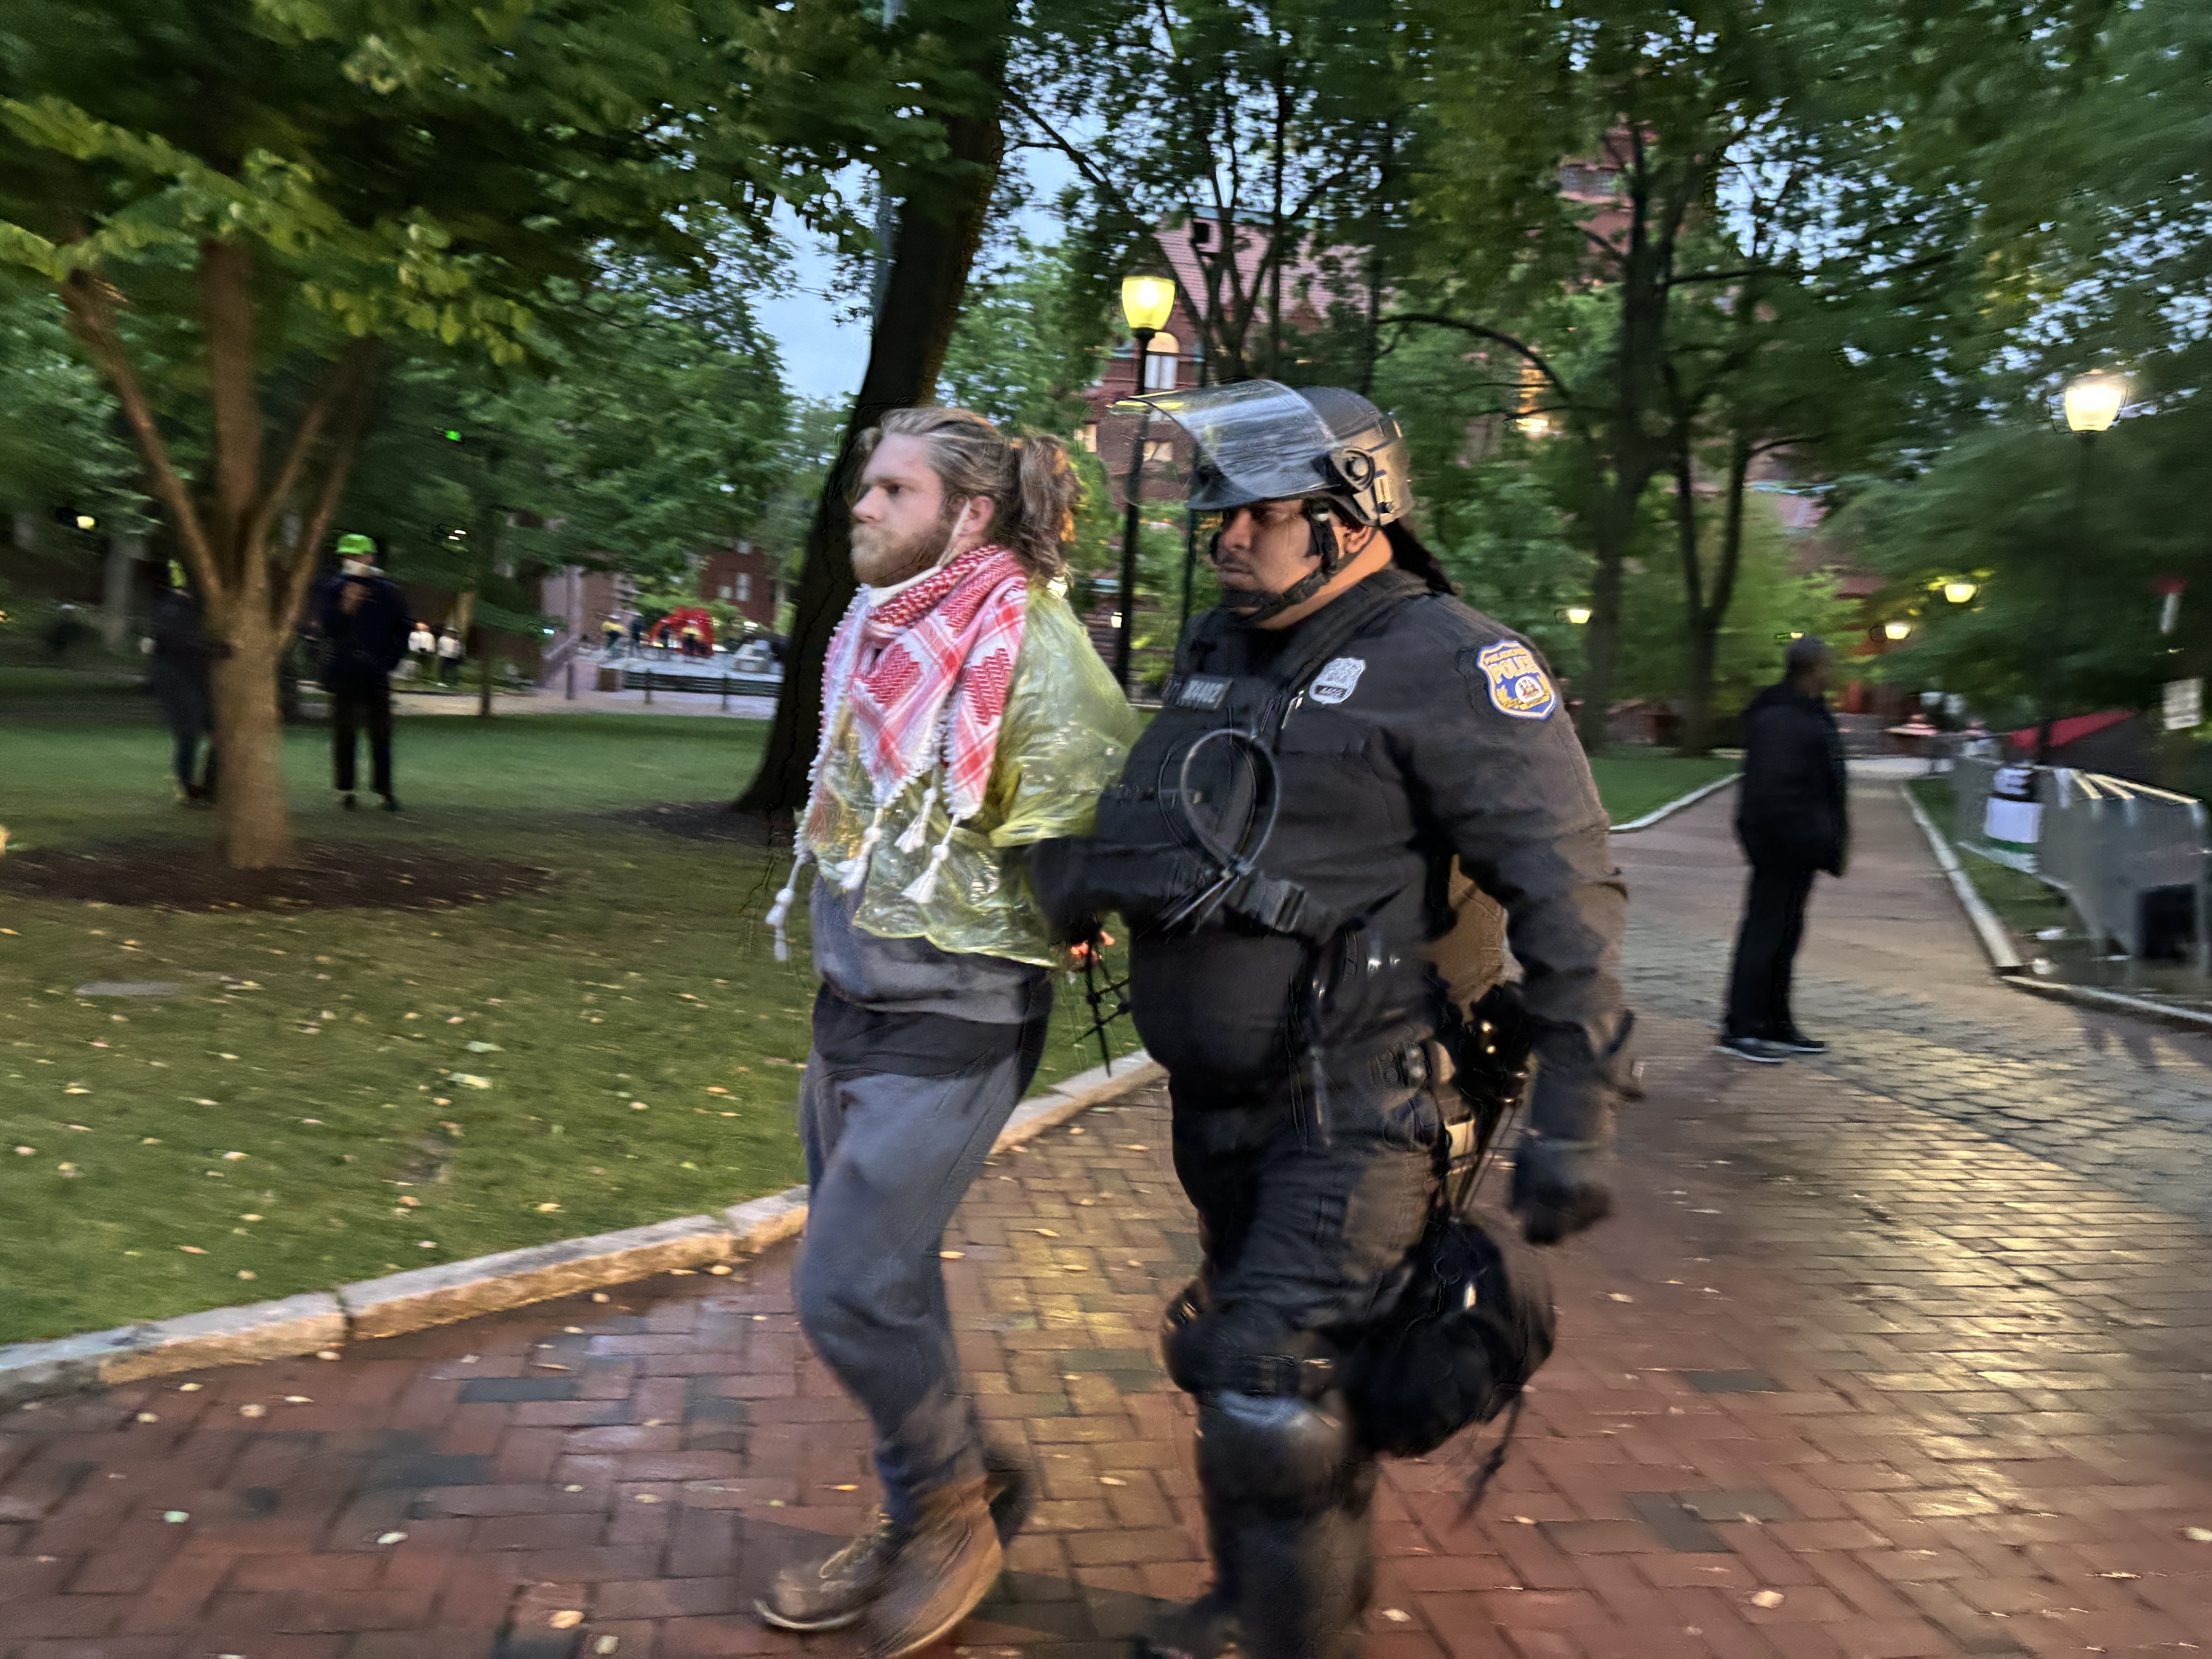 How police dismantled the pro-Palestinian encampment on Penn's campus